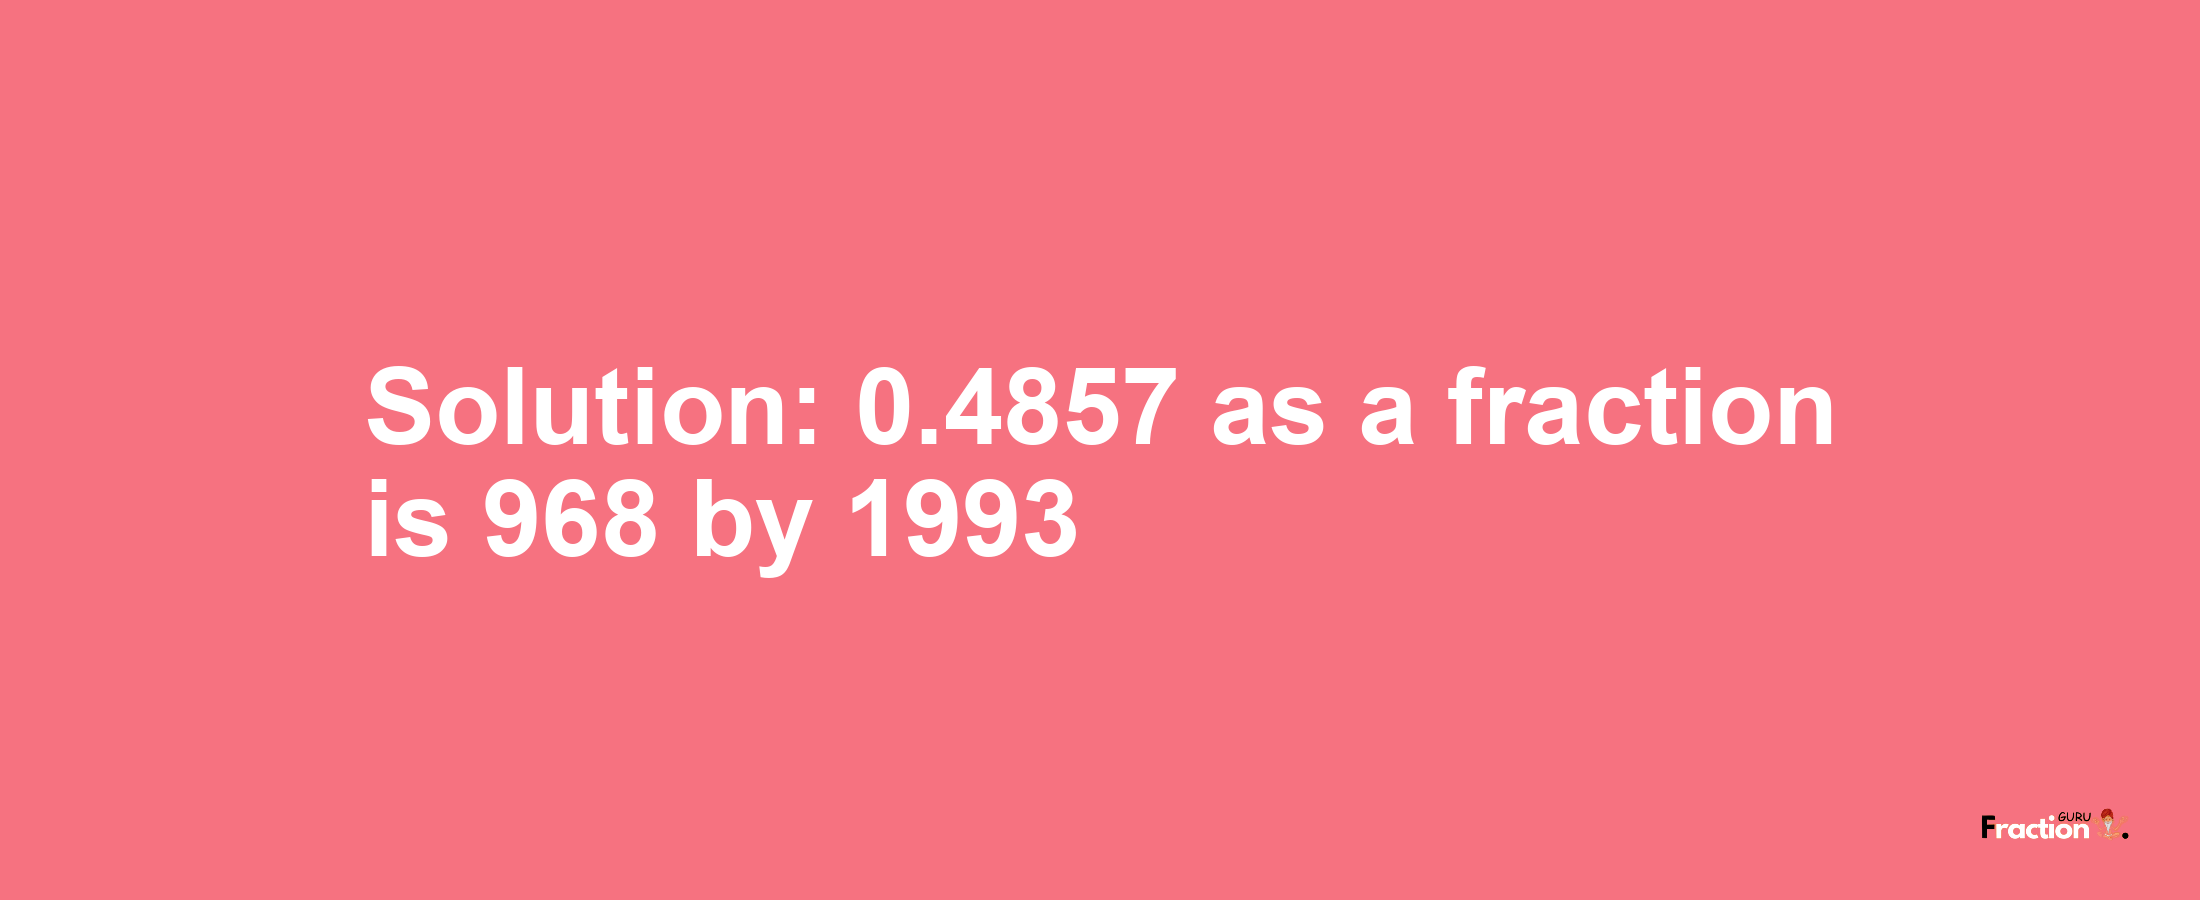 Solution:0.4857 as a fraction is 968/1993